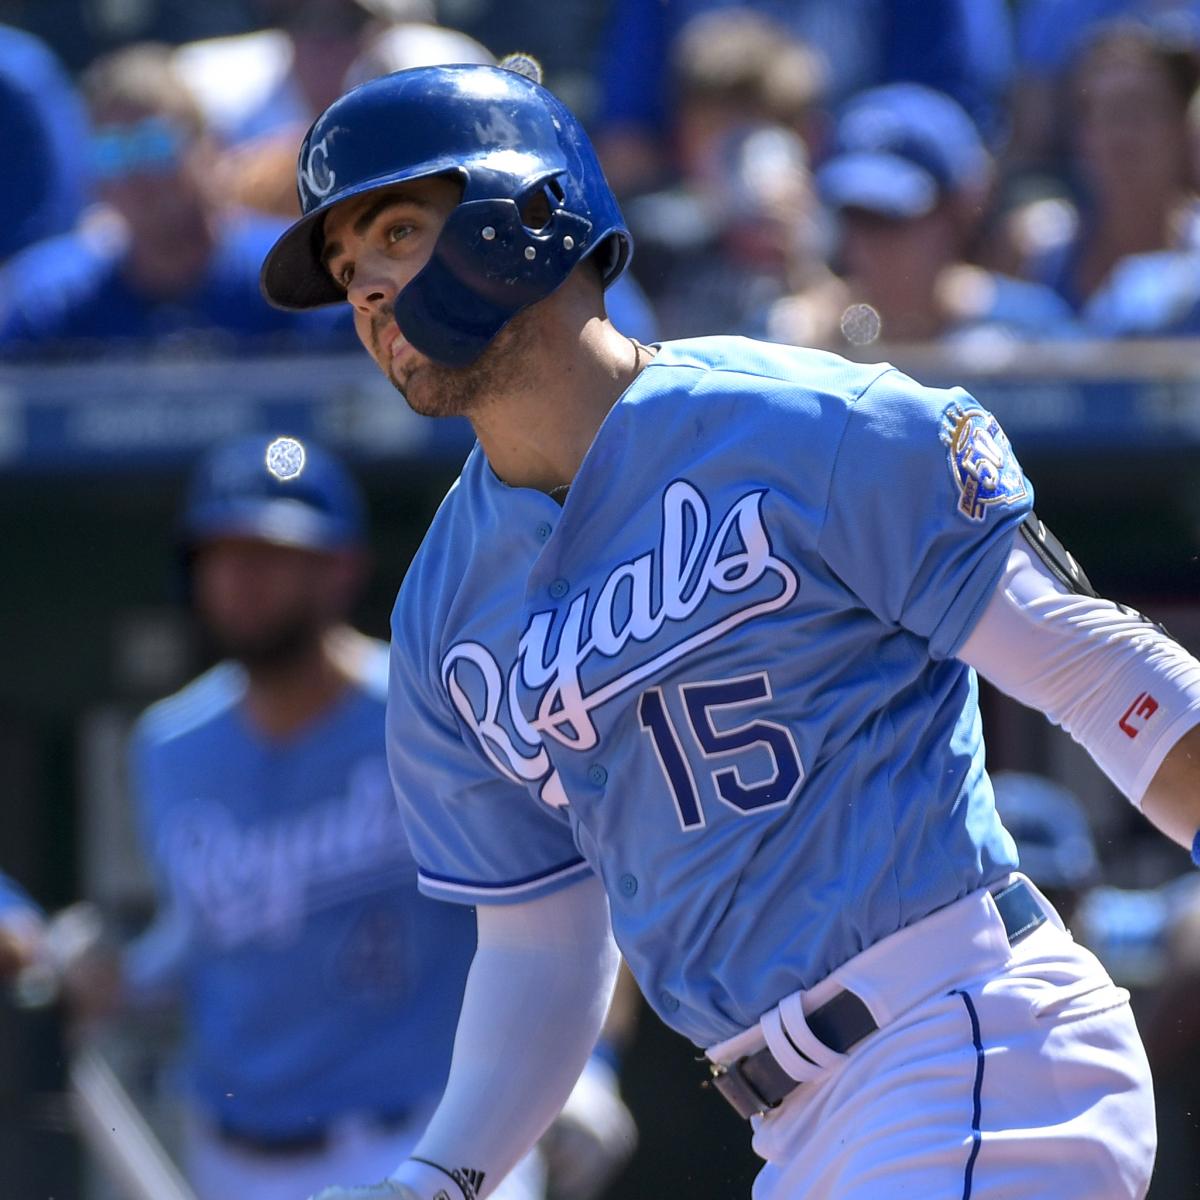 Whit Merrifield finally fitting in with Royals — with his bat and his legs